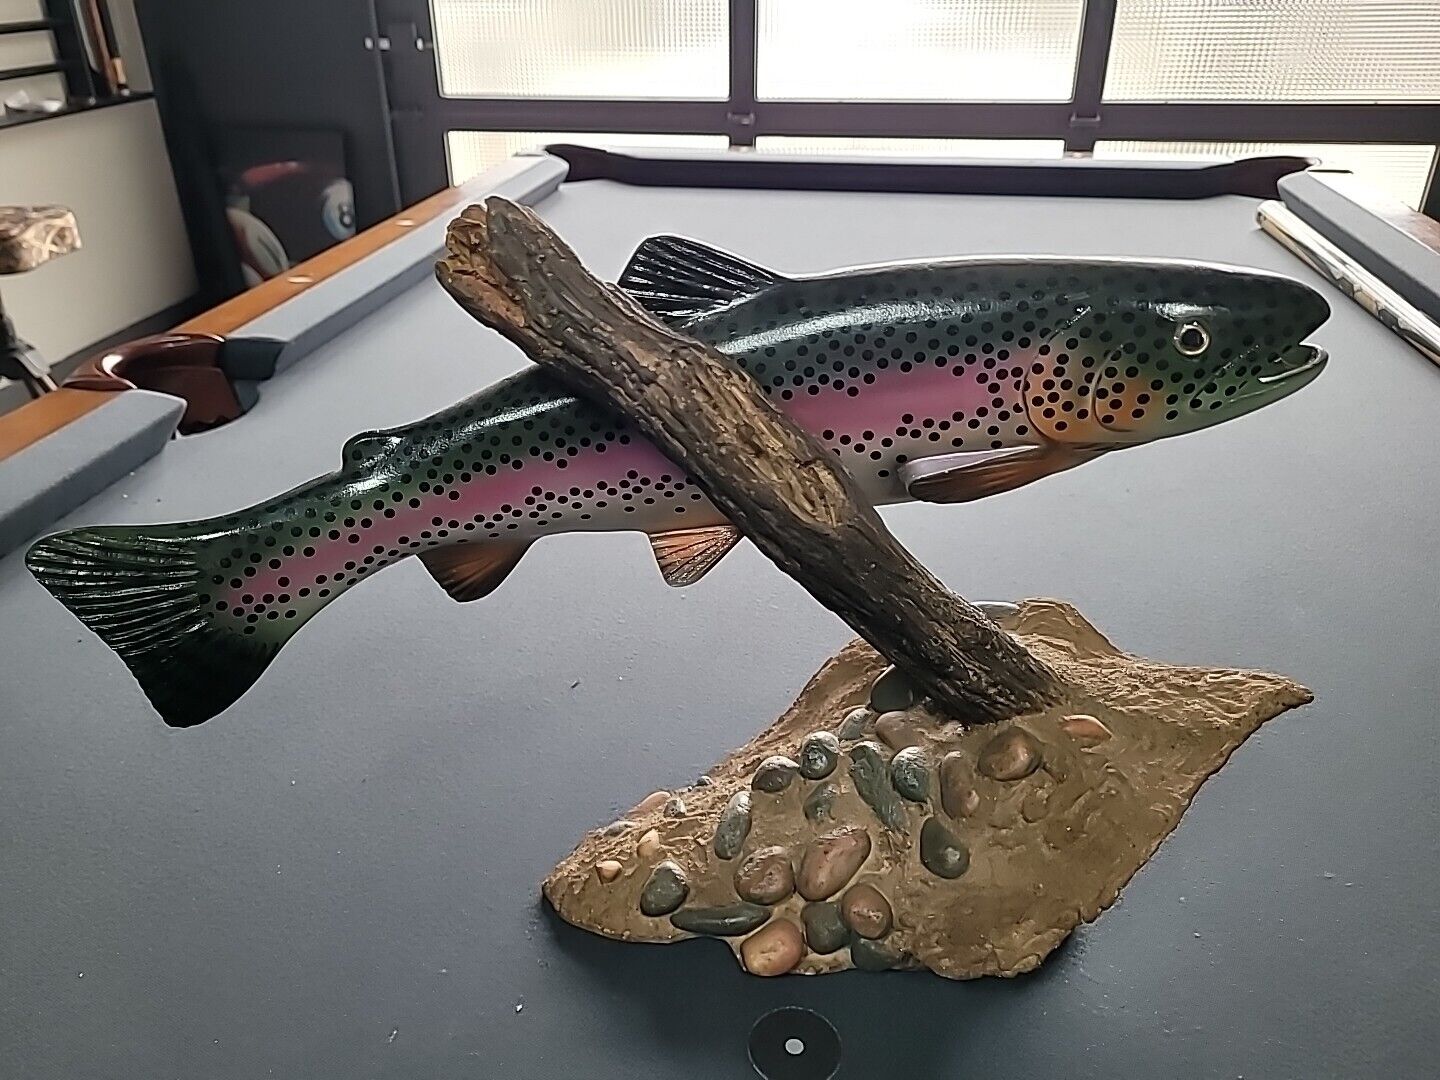 Rainbow Trout Ducks Unlimited Sculpture In Great Condition